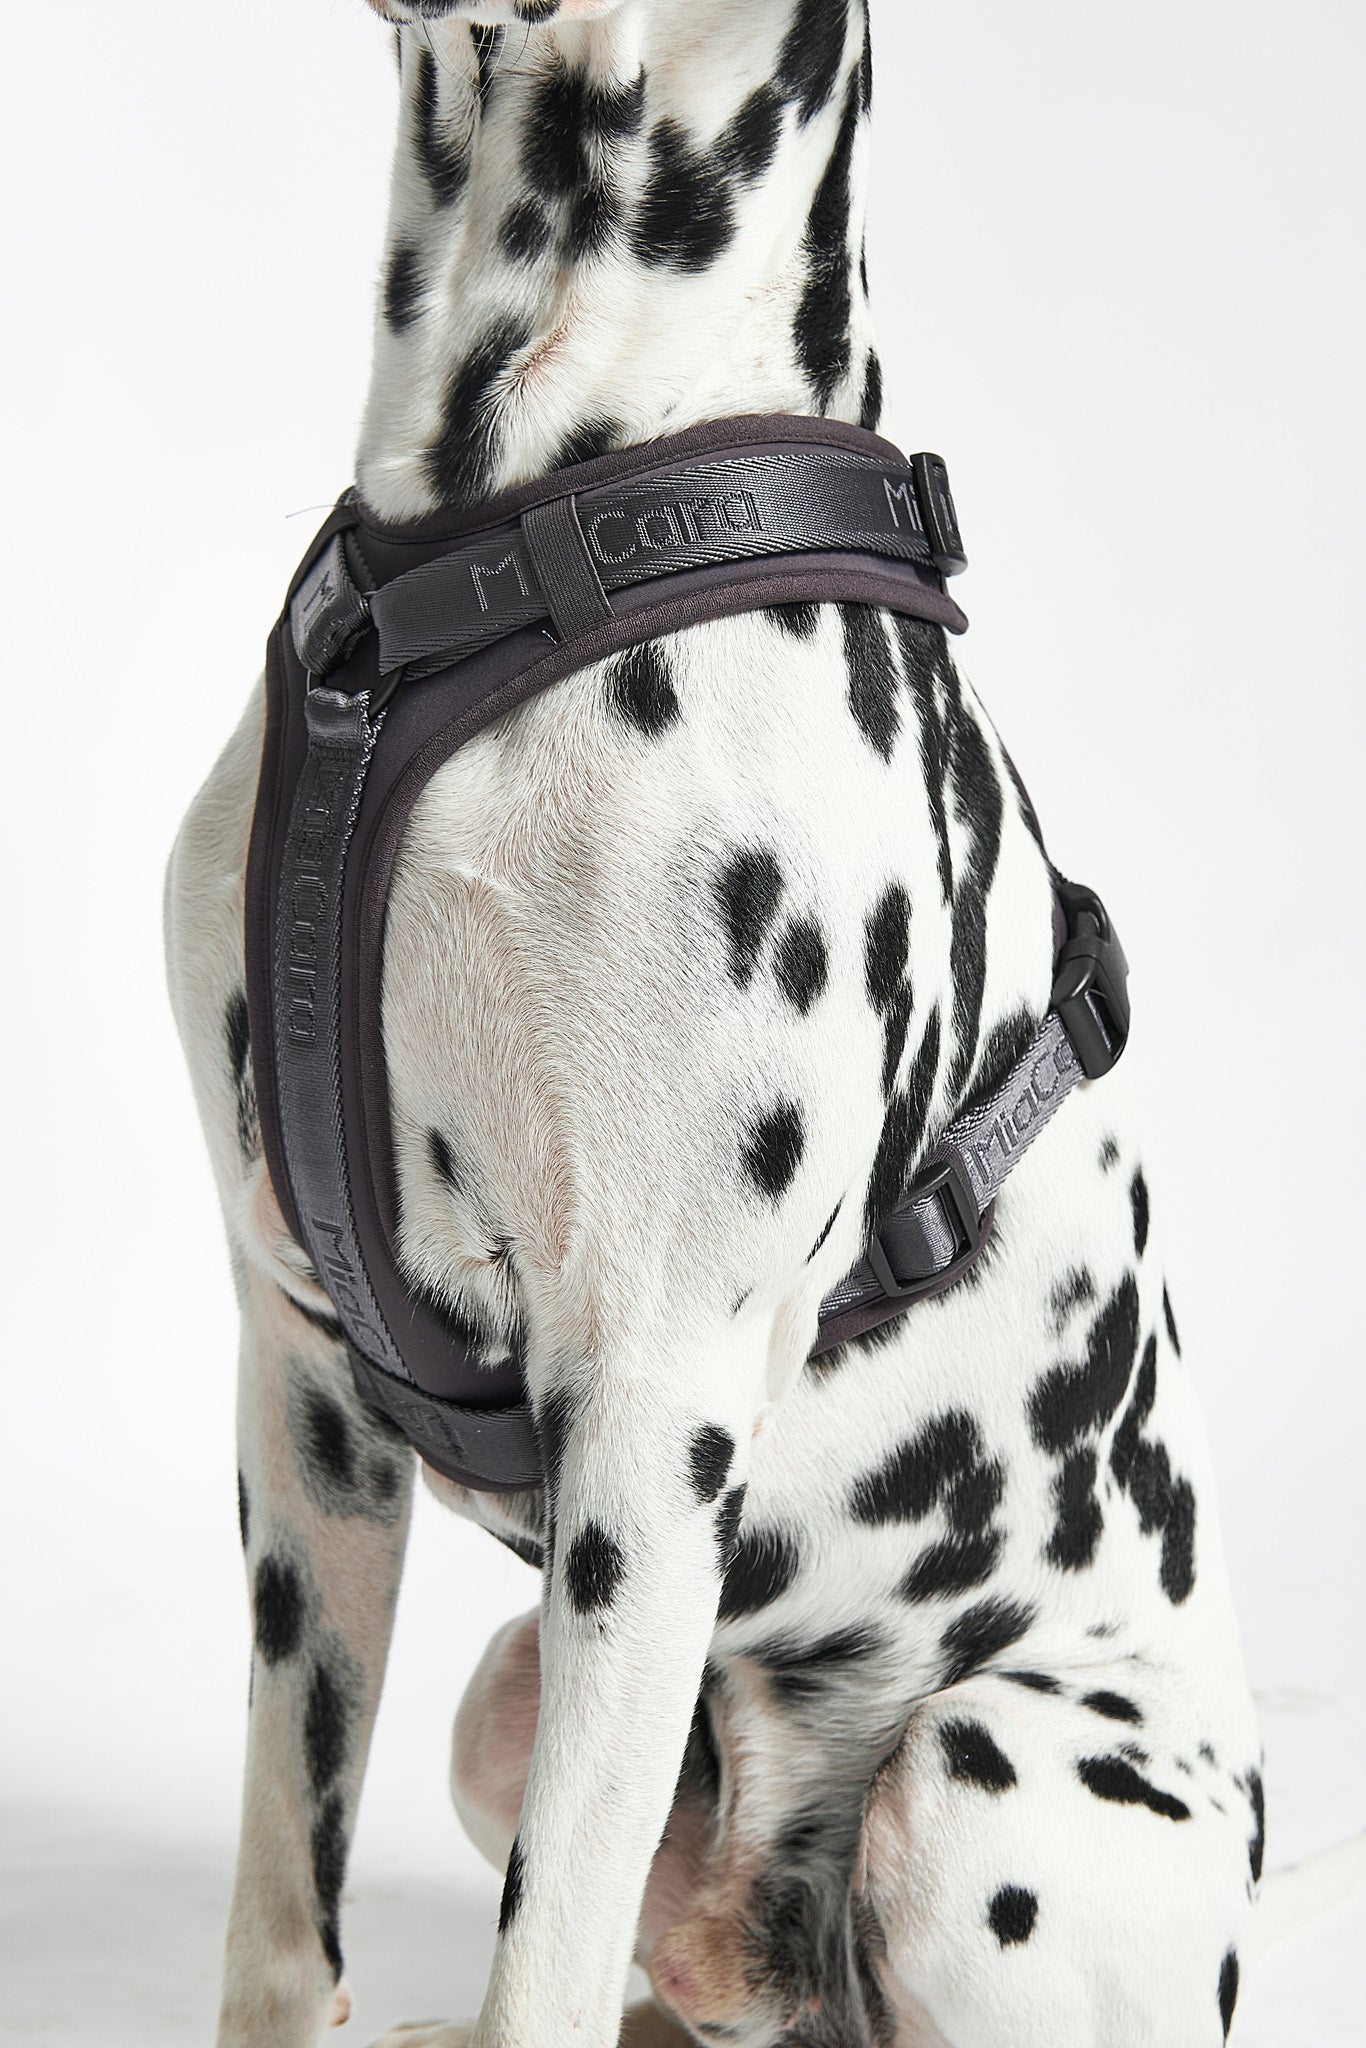 detailed size guide to help you select the perfect harness